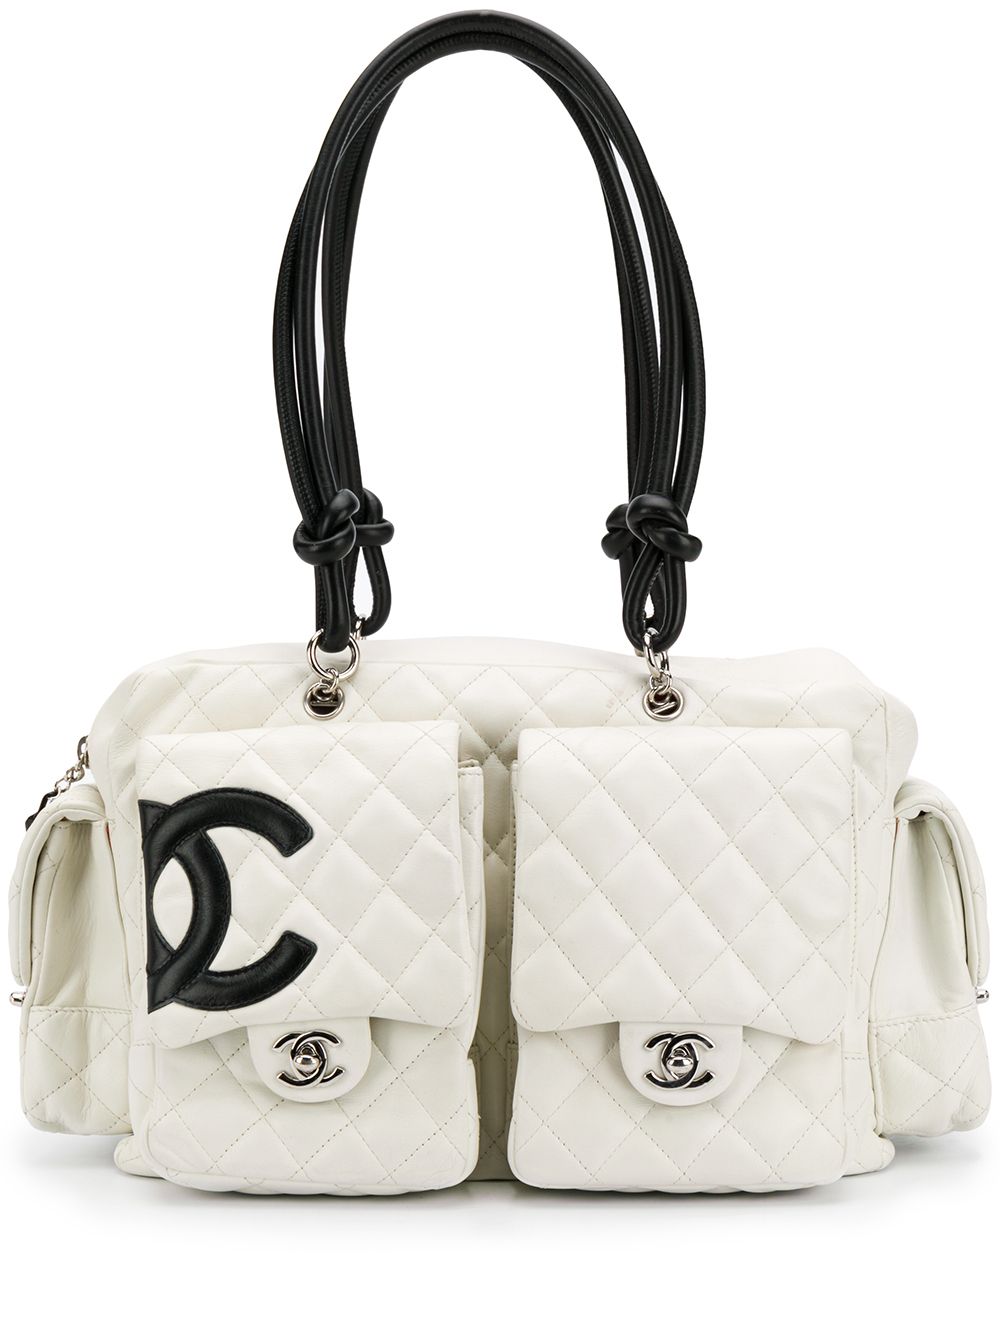 Chanel Cambon Reporter Bag in White Leather